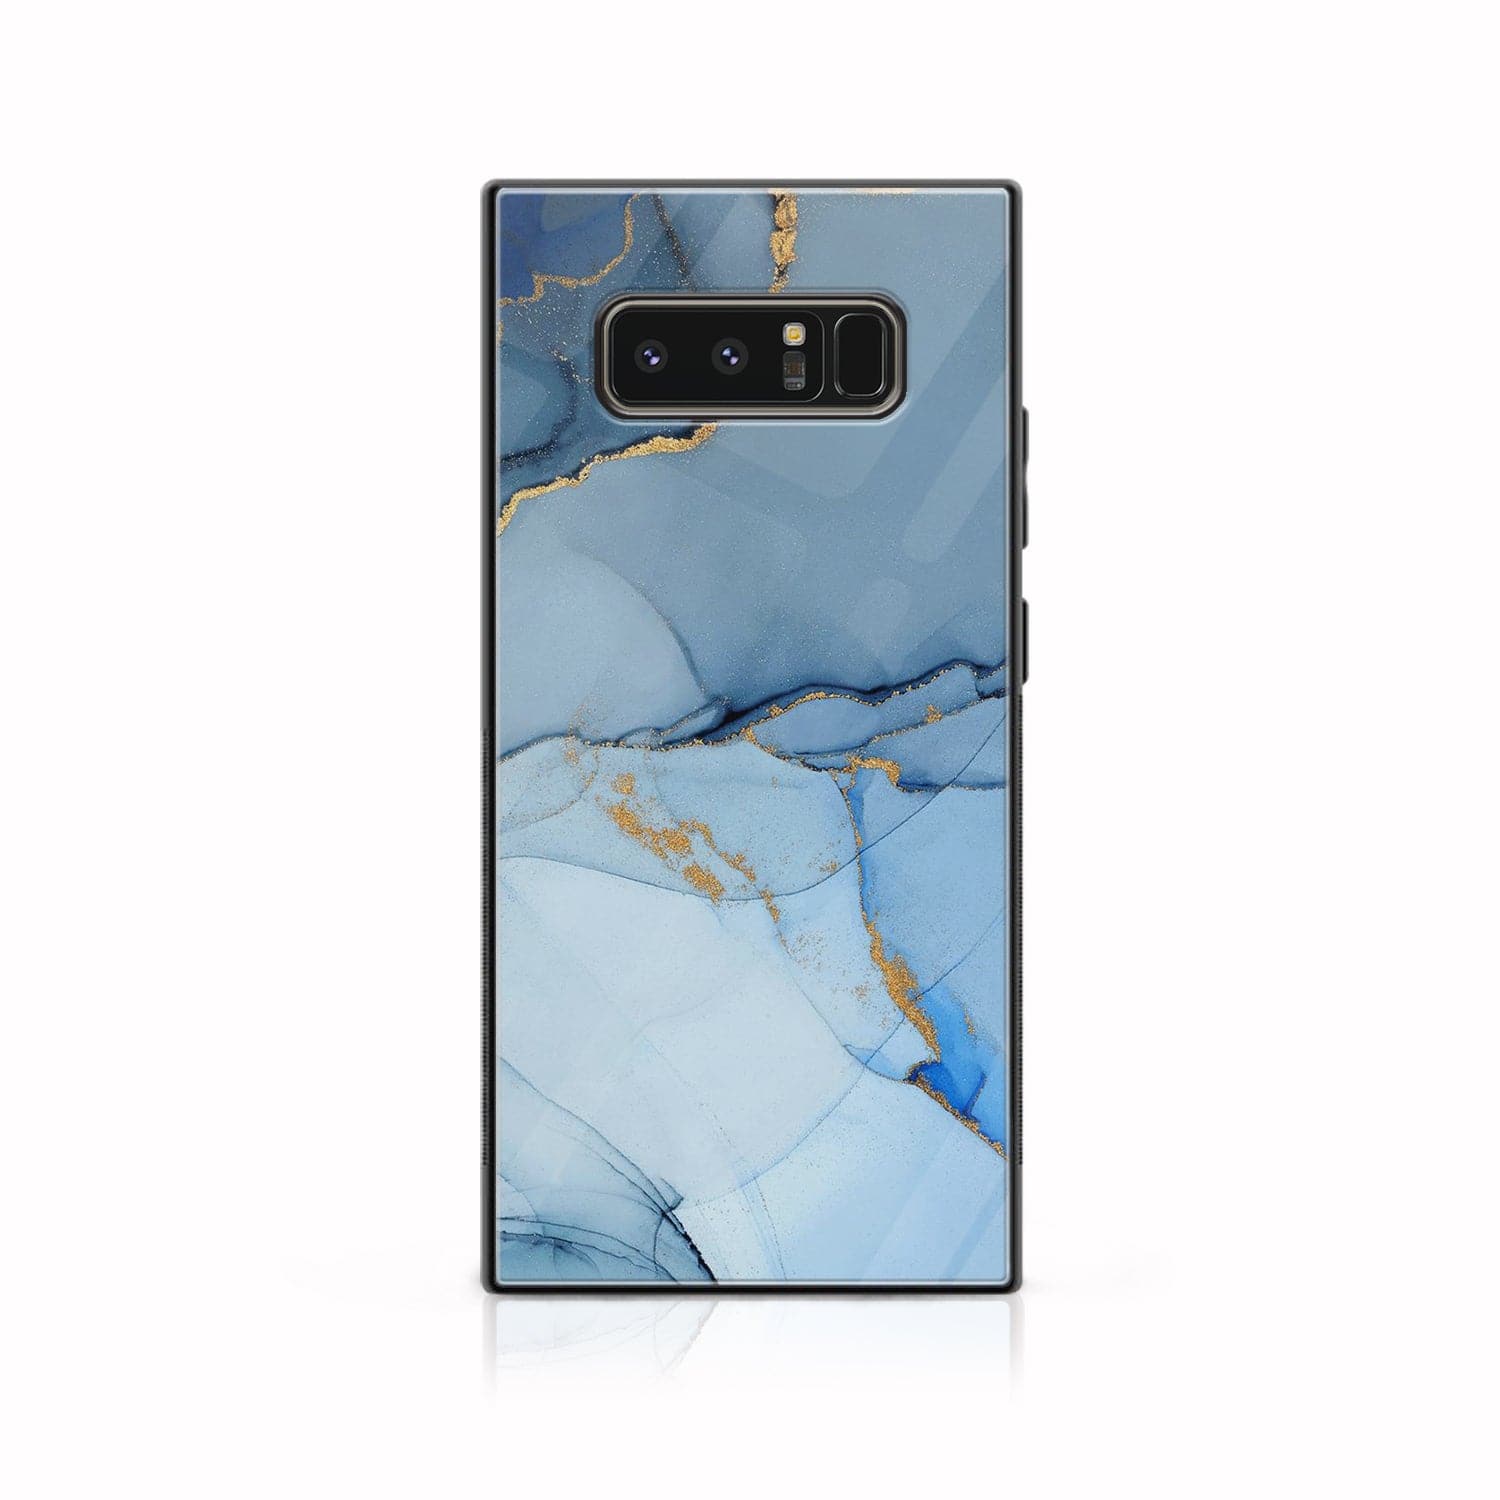 Galaxy Note 8 - Blue Marble Series - Premium Printed Glass soft Bumper shock Proof Case